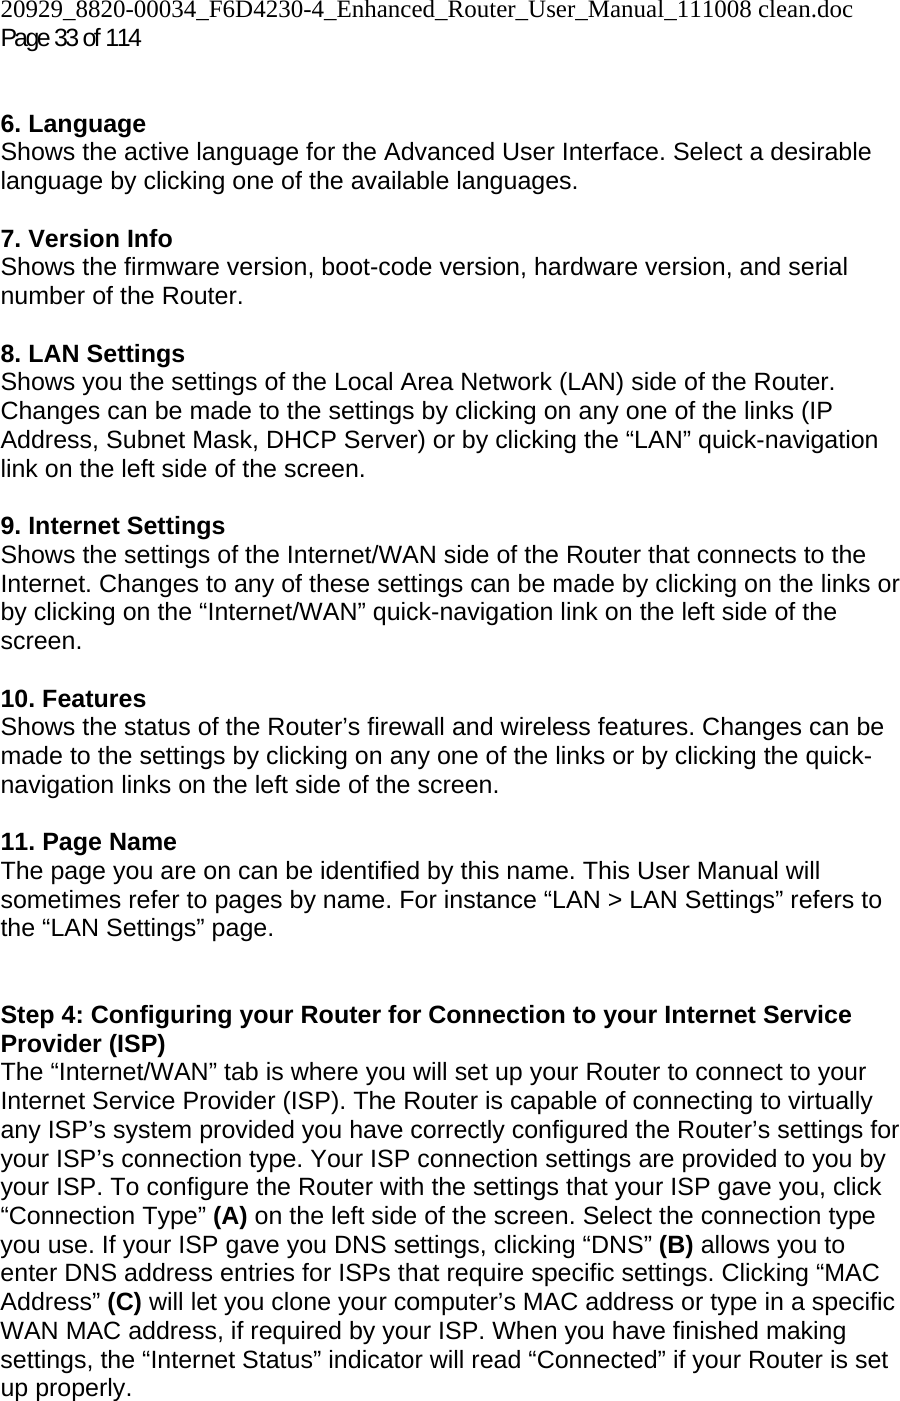 20929_8820-00034_F6D4230-4_Enhanced_Router_User_Manual_111008 clean.doc Page 33 of 114    6. Language Shows the active language for the Advanced User Interface. Select a desirable language by clicking one of the available languages.  7. Version Info  Shows the firmware version, boot-code version, hardware version, and serial number of the Router.  8. LAN Settings Shows you the settings of the Local Area Network (LAN) side of the Router. Changes can be made to the settings by clicking on any one of the links (IP Address, Subnet Mask, DHCP Server) or by clicking the “LAN” quick-navigation link on the left side of the screen.  9. Internet Settings  Shows the settings of the Internet/WAN side of the Router that connects to the Internet. Changes to any of these settings can be made by clicking on the links or by clicking on the “Internet/WAN” quick-navigation link on the left side of the screen.  10. Features  Shows the status of the Router’s firewall and wireless features. Changes can be made to the settings by clicking on any one of the links or by clicking the quick-navigation links on the left side of the screen.  11. Page Name  The page you are on can be identified by this name. This User Manual will sometimes refer to pages by name. For instance “LAN &gt; LAN Settings” refers to the “LAN Settings” page.  Step 4: Configuring your Router for Connection to your Internet Service Provider (ISP) The “Internet/WAN” tab is where you will set up your Router to connect to your Internet Service Provider (ISP). The Router is capable of connecting to virtually any ISP’s system provided you have correctly configured the Router’s settings for your ISP’s connection type. Your ISP connection settings are provided to you by your ISP. To configure the Router with the settings that your ISP gave you, click “Connection Type” (A) on the left side of the screen. Select the connection type you use. If your ISP gave you DNS settings, clicking “DNS” (B) allows you to enter DNS address entries for ISPs that require specific settings. Clicking “MAC Address” (C) will let you clone your computer’s MAC address or type in a specific WAN MAC address, if required by your ISP. When you have finished making settings, the “Internet Status” indicator will read “Connected” if your Router is set up properly.